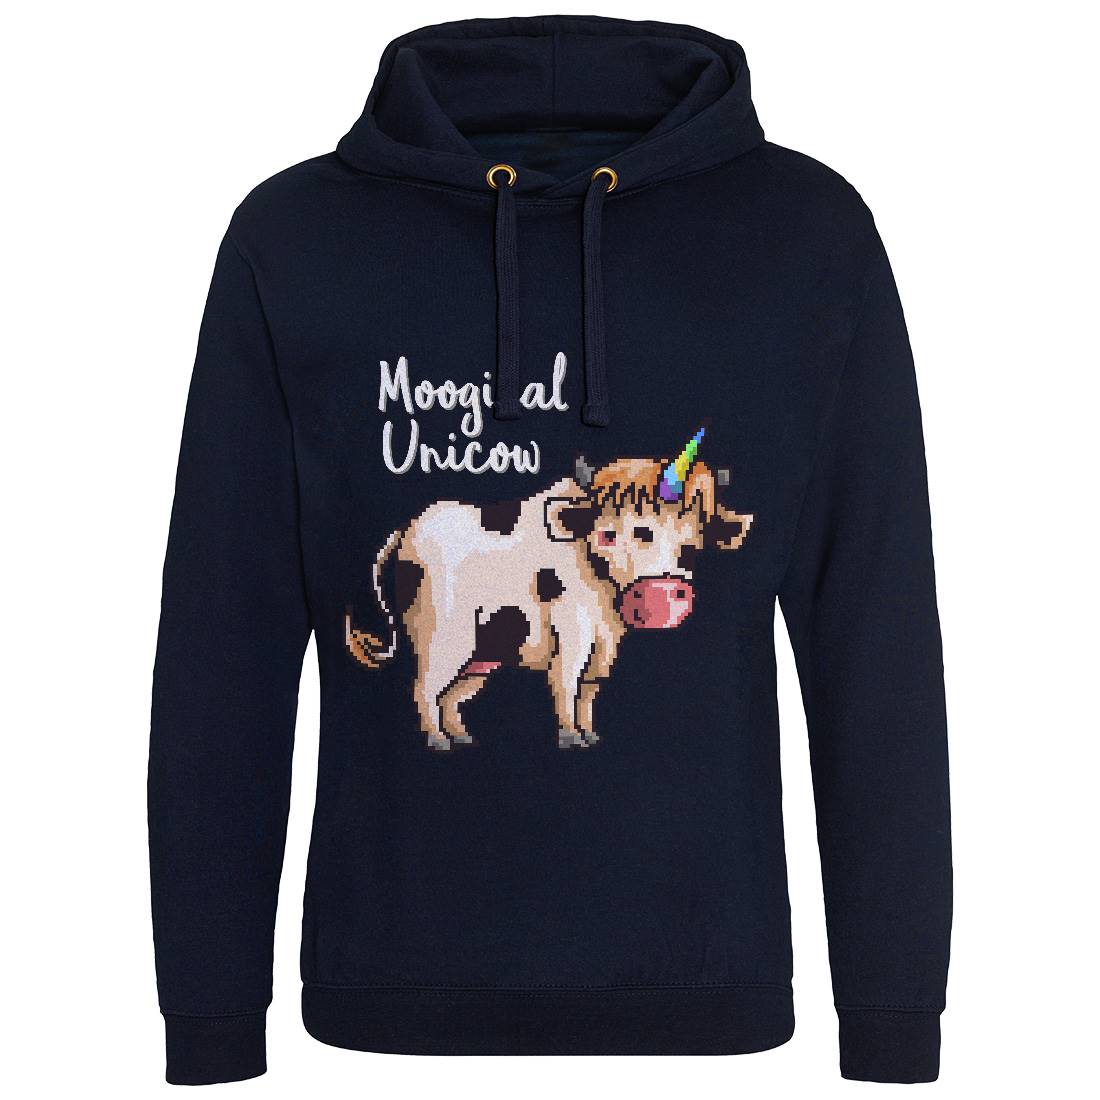 Moogical Unicow Mens Hoodie Without Pocket Animals B933